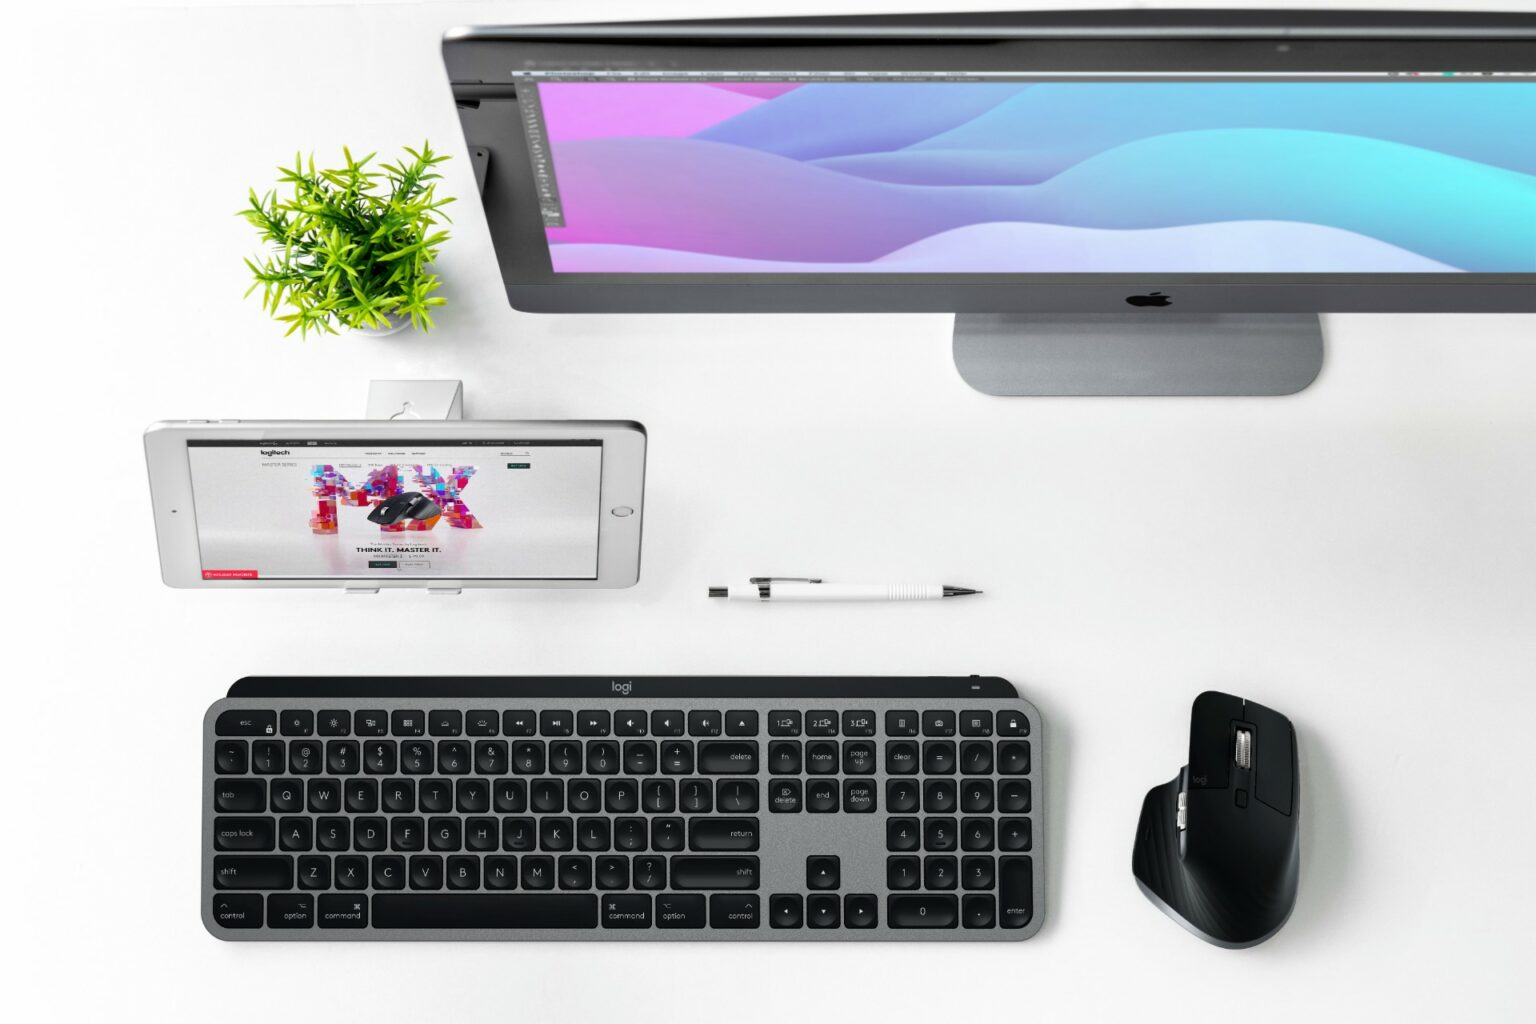 MX Master 3 for Mac and MX Keys for Mac - optimized for Mac and now in space gray.